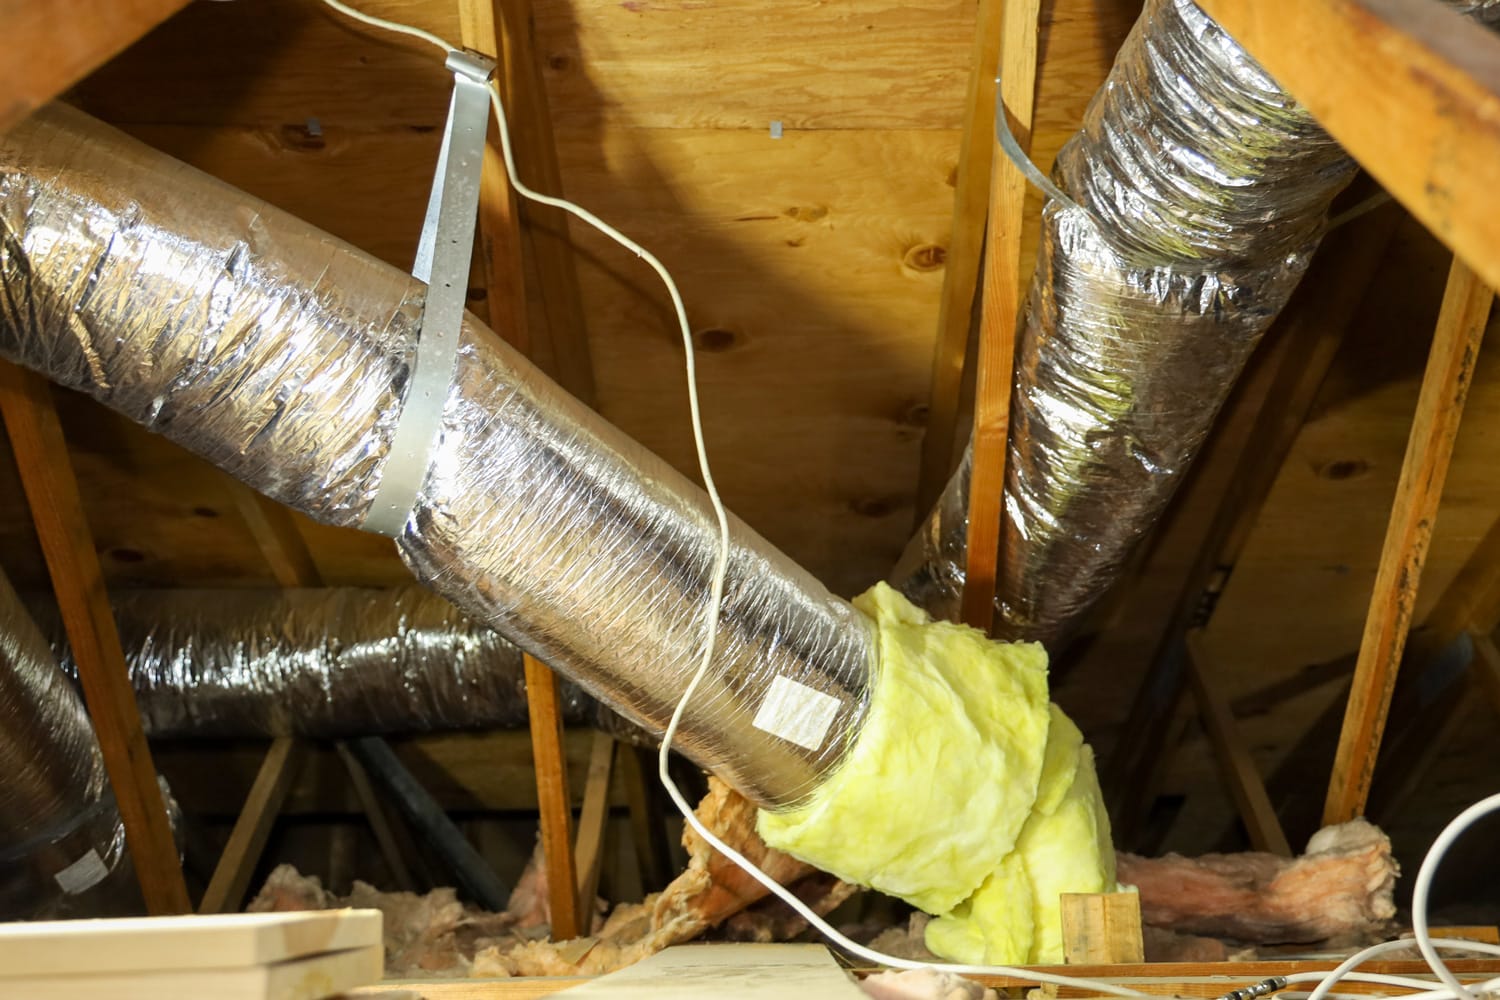 View of fiber glass duct for central air in an attic.